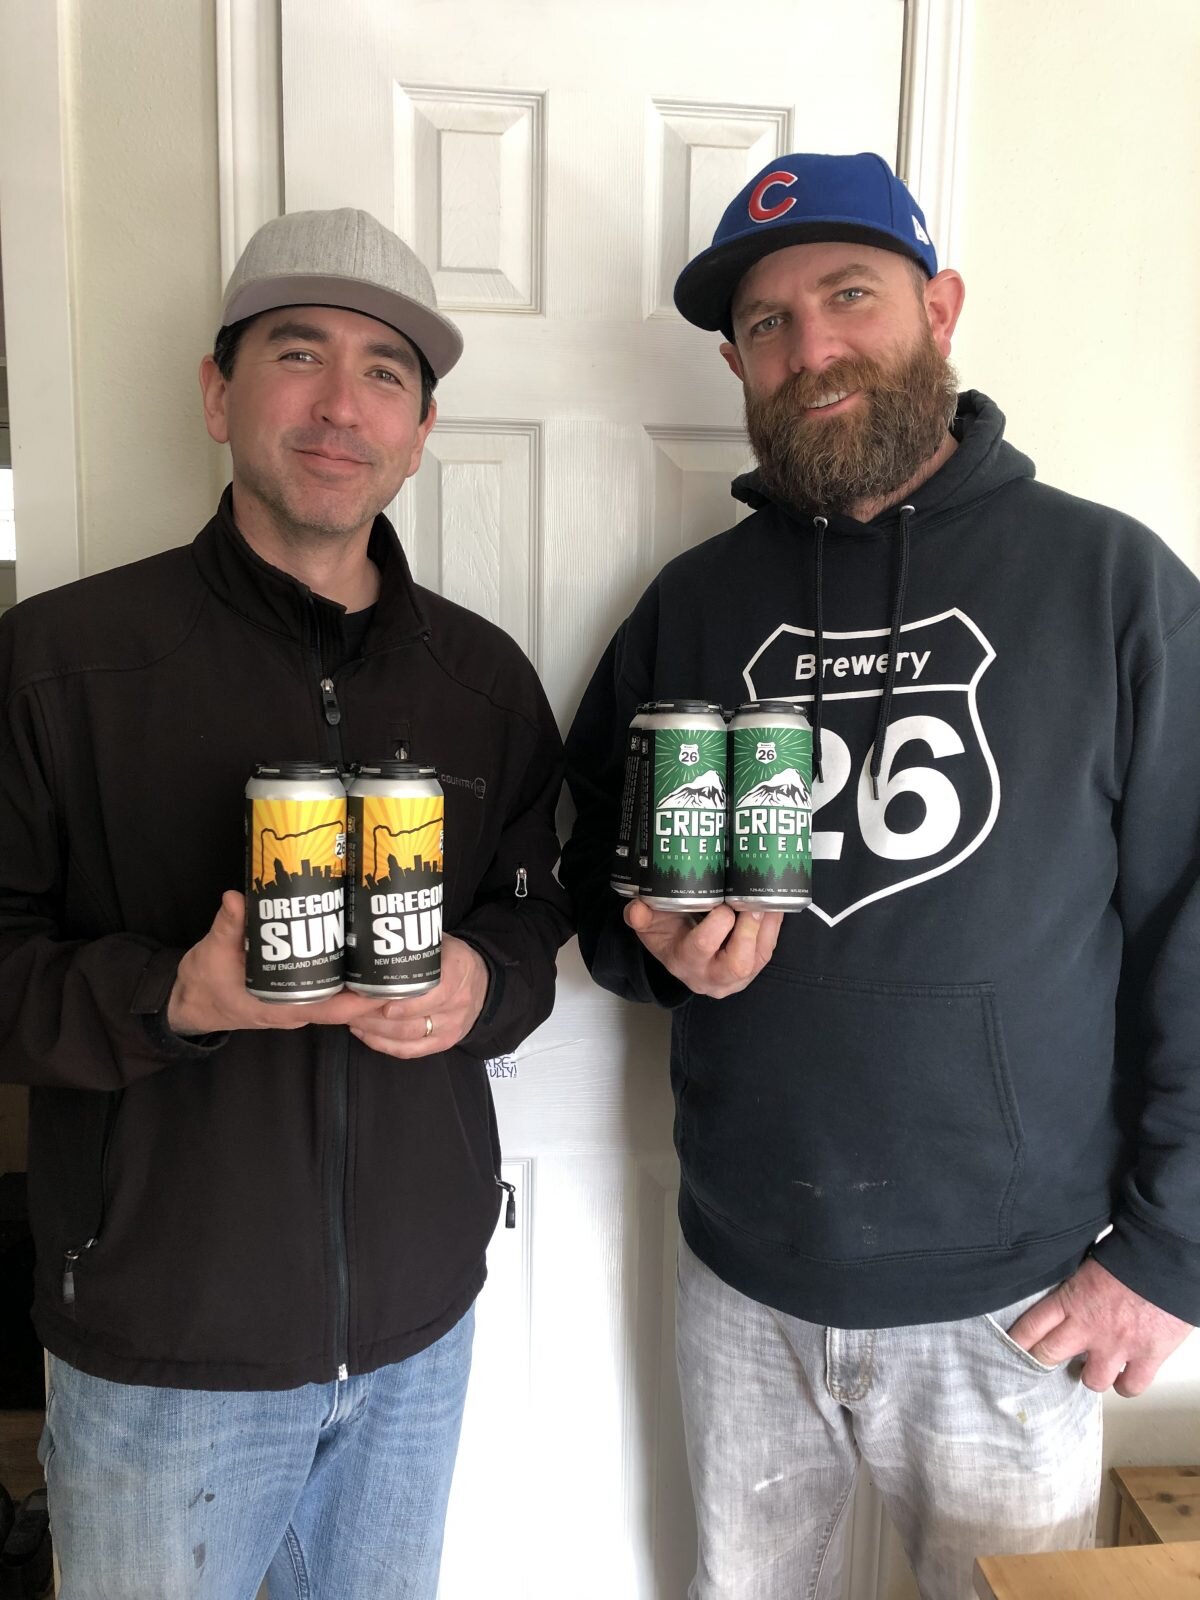 Andy Shaw and Keith Hattori of Brewery 26